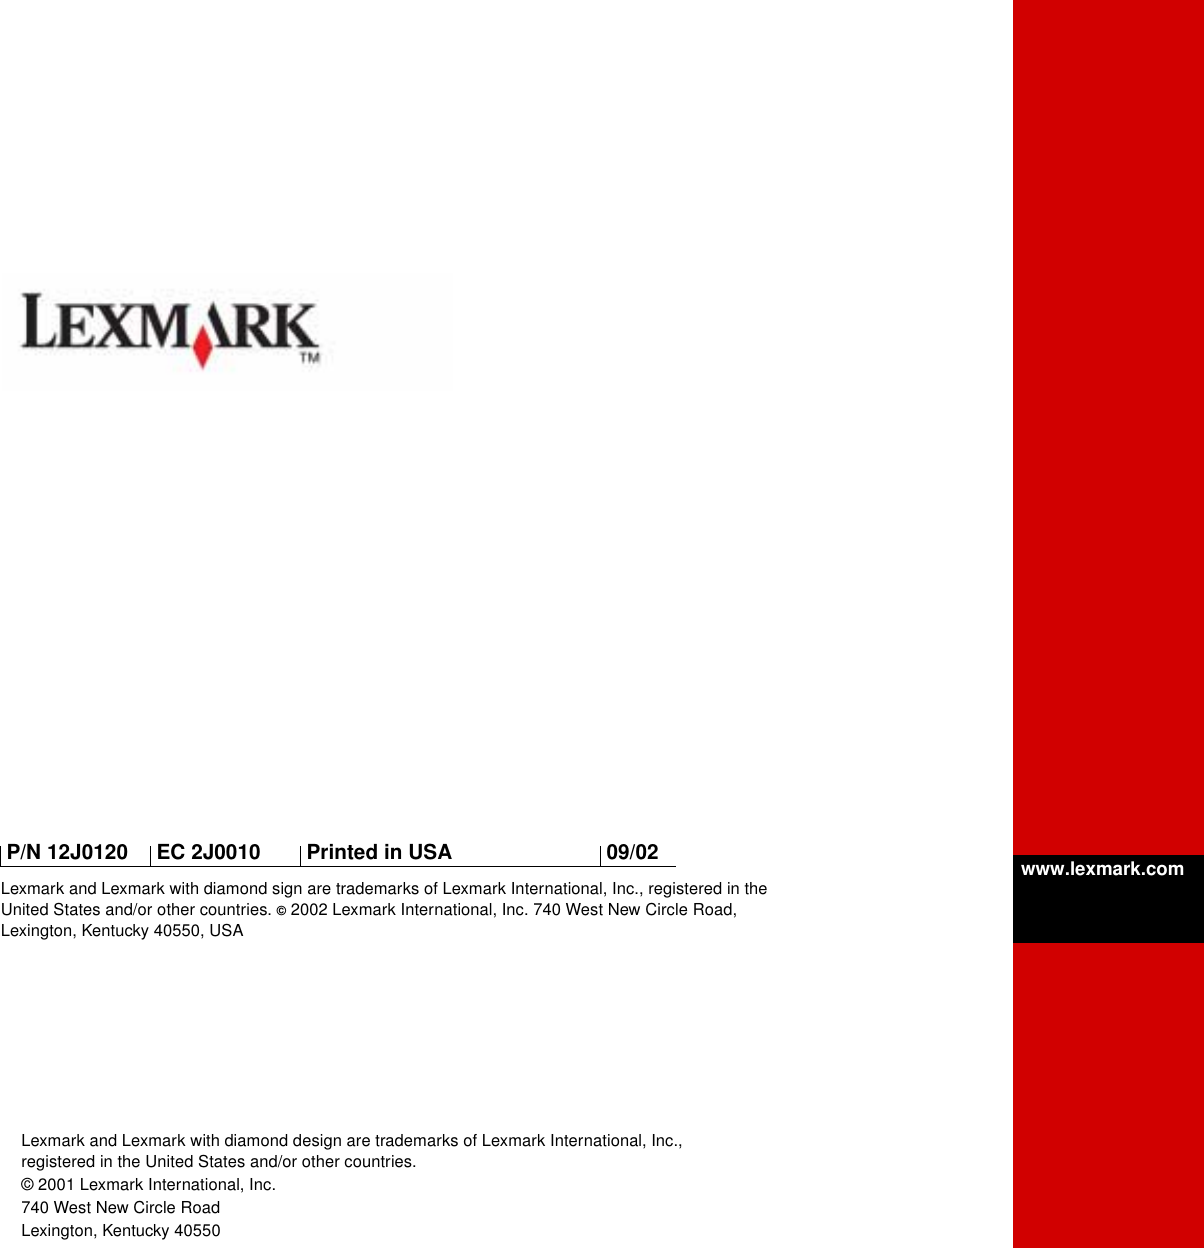 Lexmark and Lexmark with diamond design are trademarks of Lexmark International, Inc., registered in the United States and/or other countries. © 2001 Lexmark International, Inc.740 West New Circle RoadLexington, Kentucky 40550www.lexmark.comLexmark and Lexmark with diamond sign are trademarks of Lexmark International, Inc., registered in the United States and/or other countries. © 2002 Lexmark International, Inc. 740 West New Circle Road, Lexington, Kentucky 40550, USA P/N 12J0120  EC 2J0010  Printed in USA  09/02